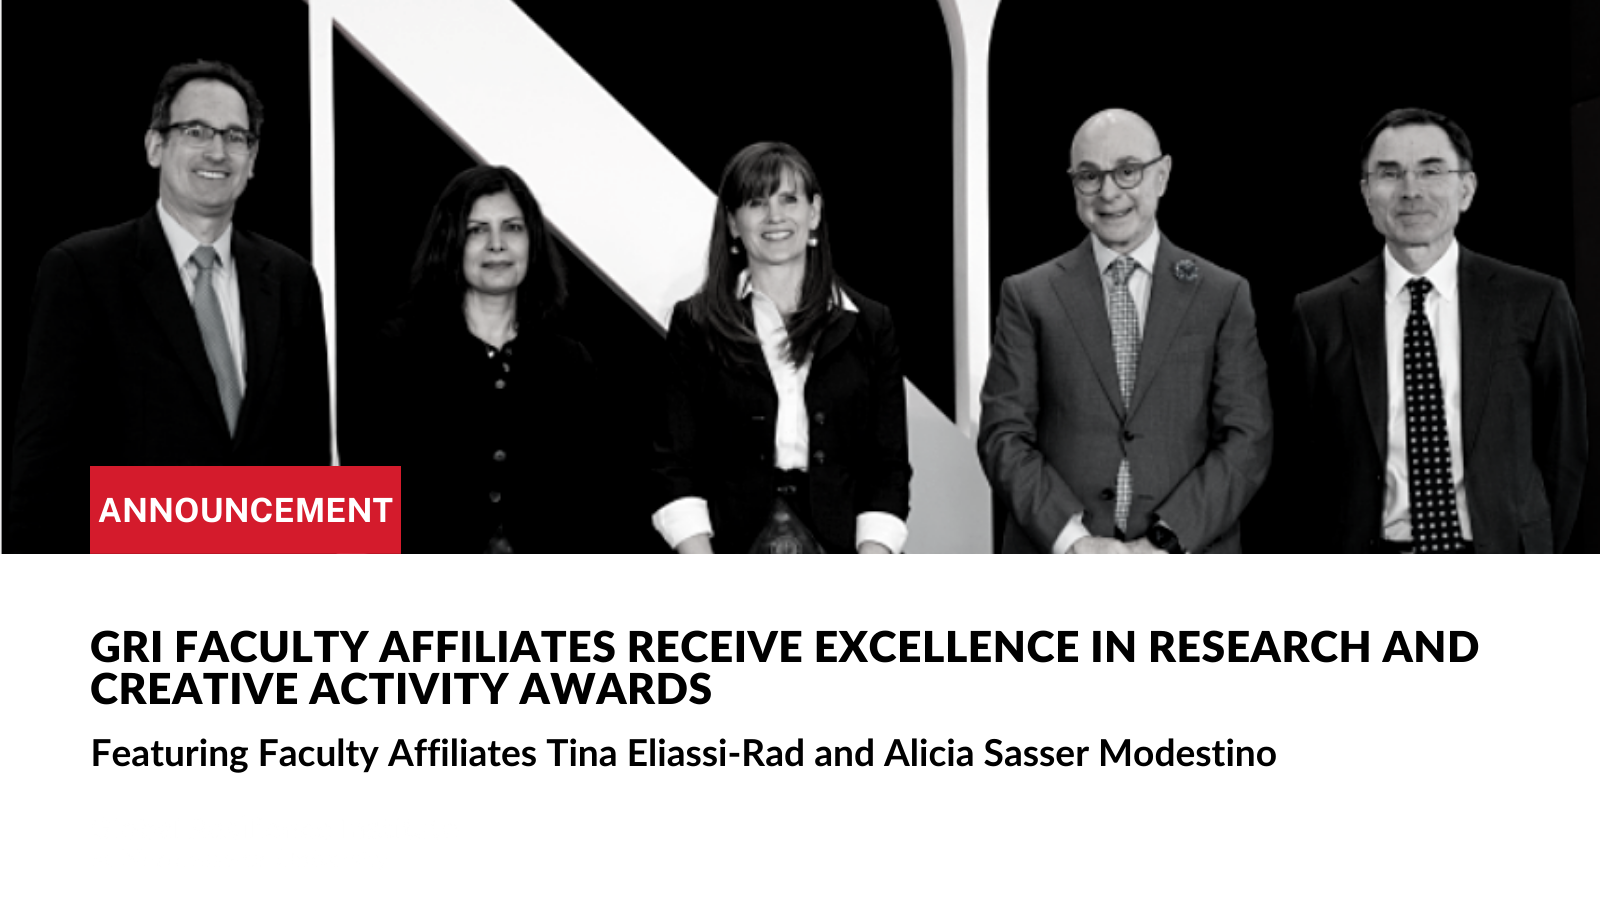 GRI Faculty affiliates receive Excellence in Research and Creative Activity Awards